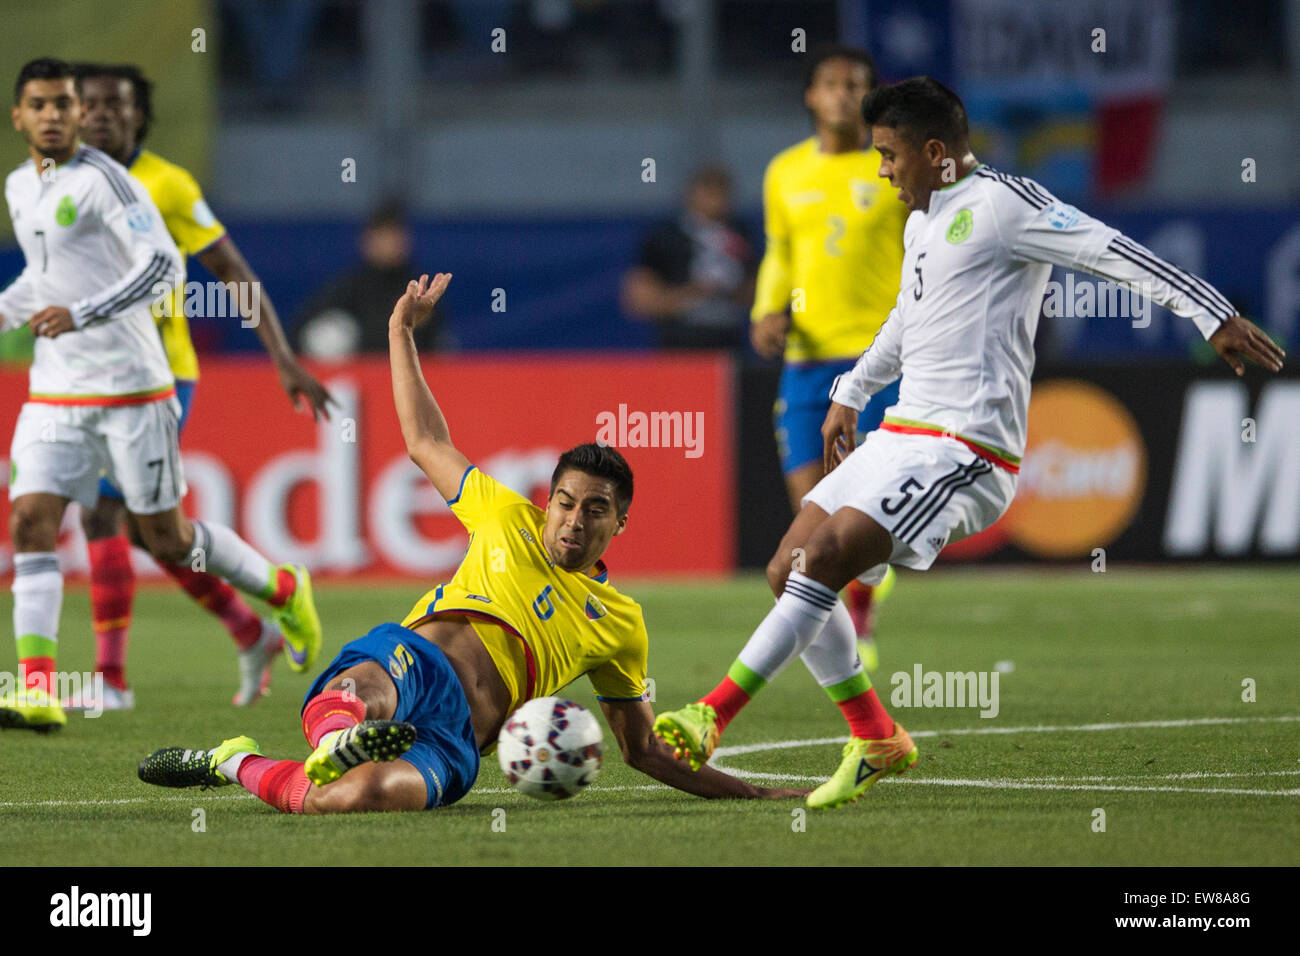 Rancagua, Chile. 19th June, 2015. Mexico's Juan Valenzuela (R) vies with Ecuador's Christian Noboa during the Group A match of the Copa America Chile 2015, held in the El Teniente stadium, in Rancagua, Chile, on June 19, 2015. Ecuador won 2-1. Credit:  Luis Echeverria/Xinhua/Alamy Live News Stock Photo